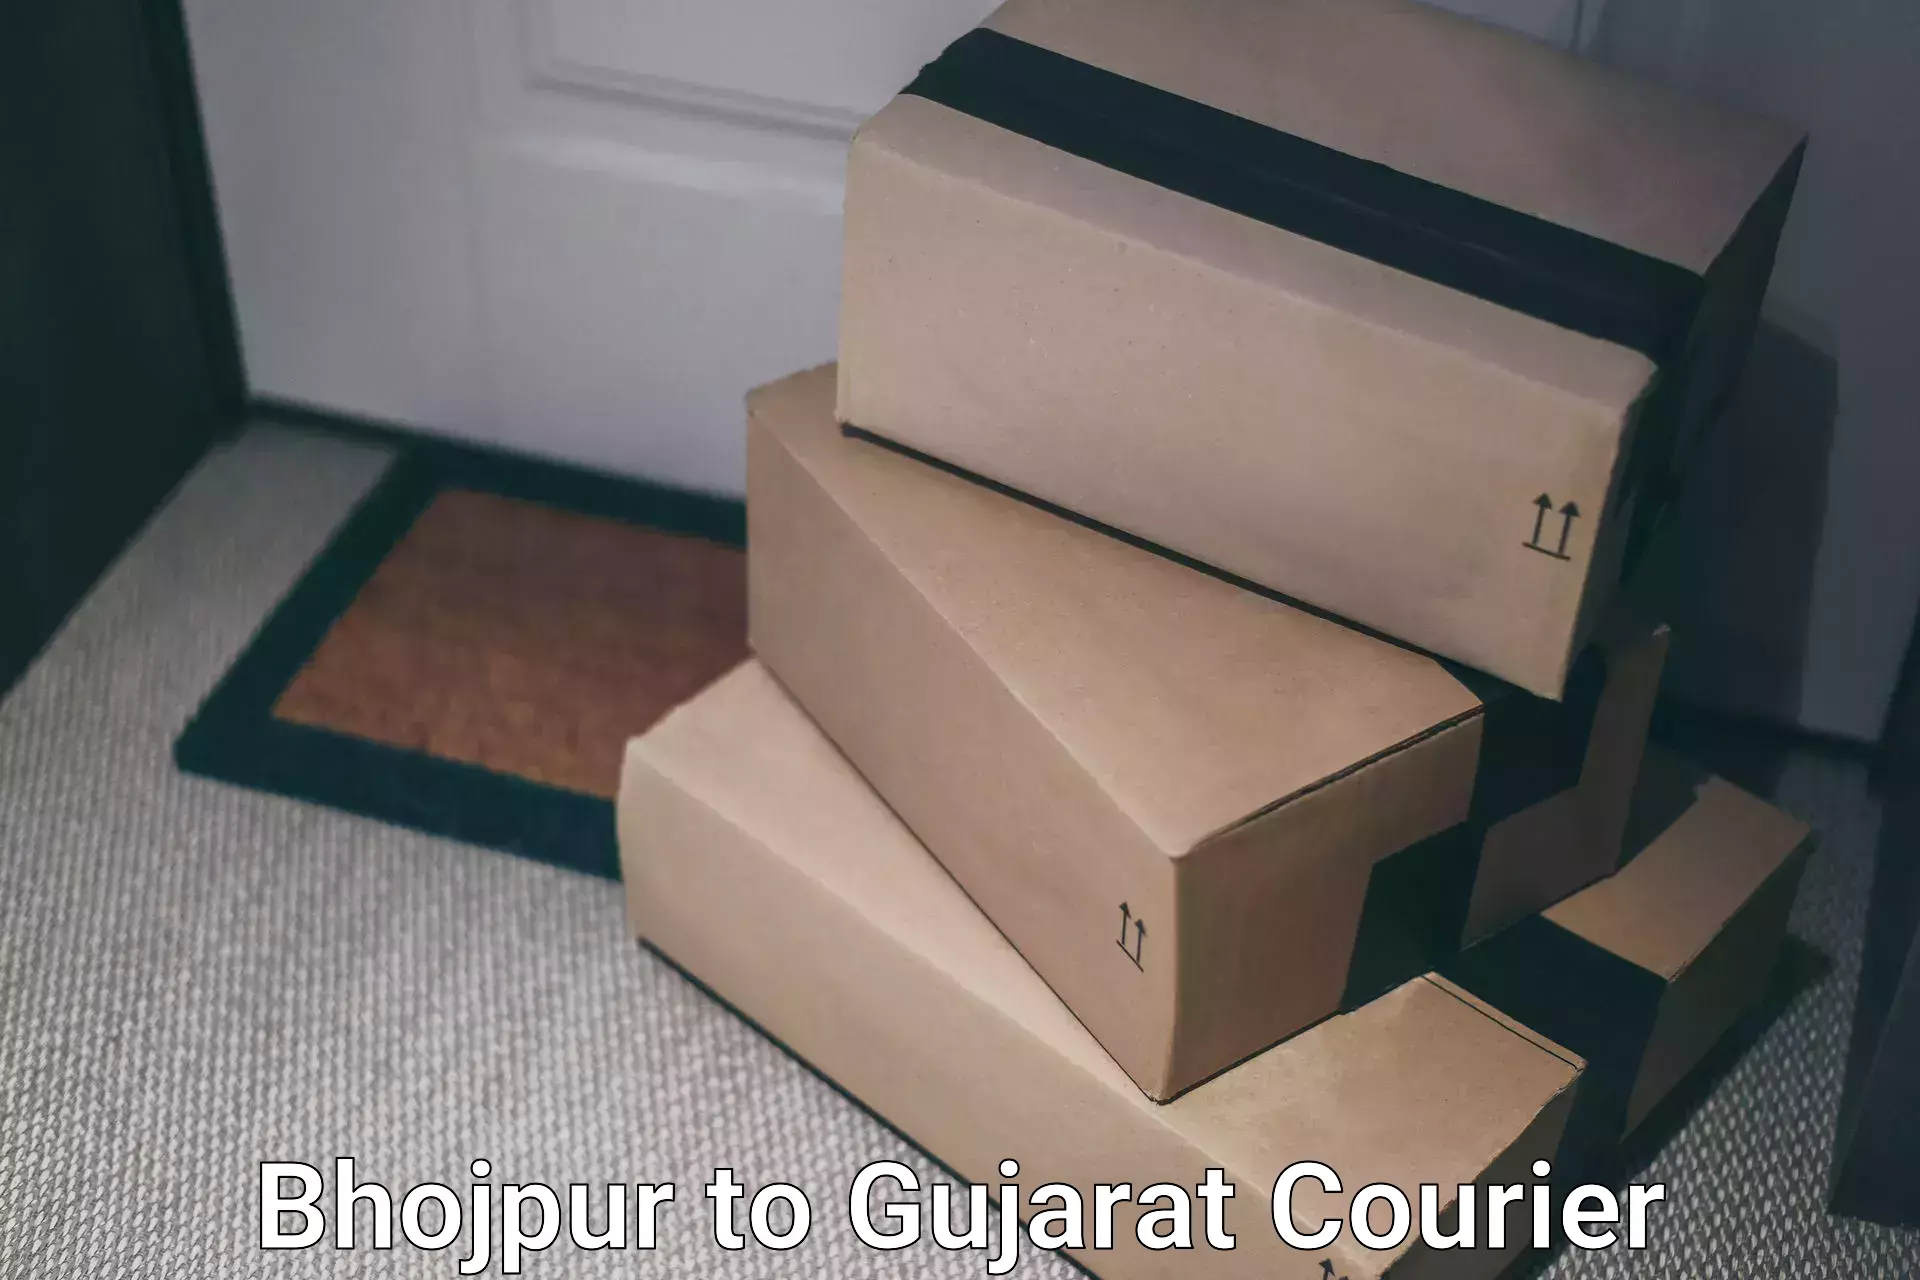 Delivery service partnership Bhojpur to Gujarat